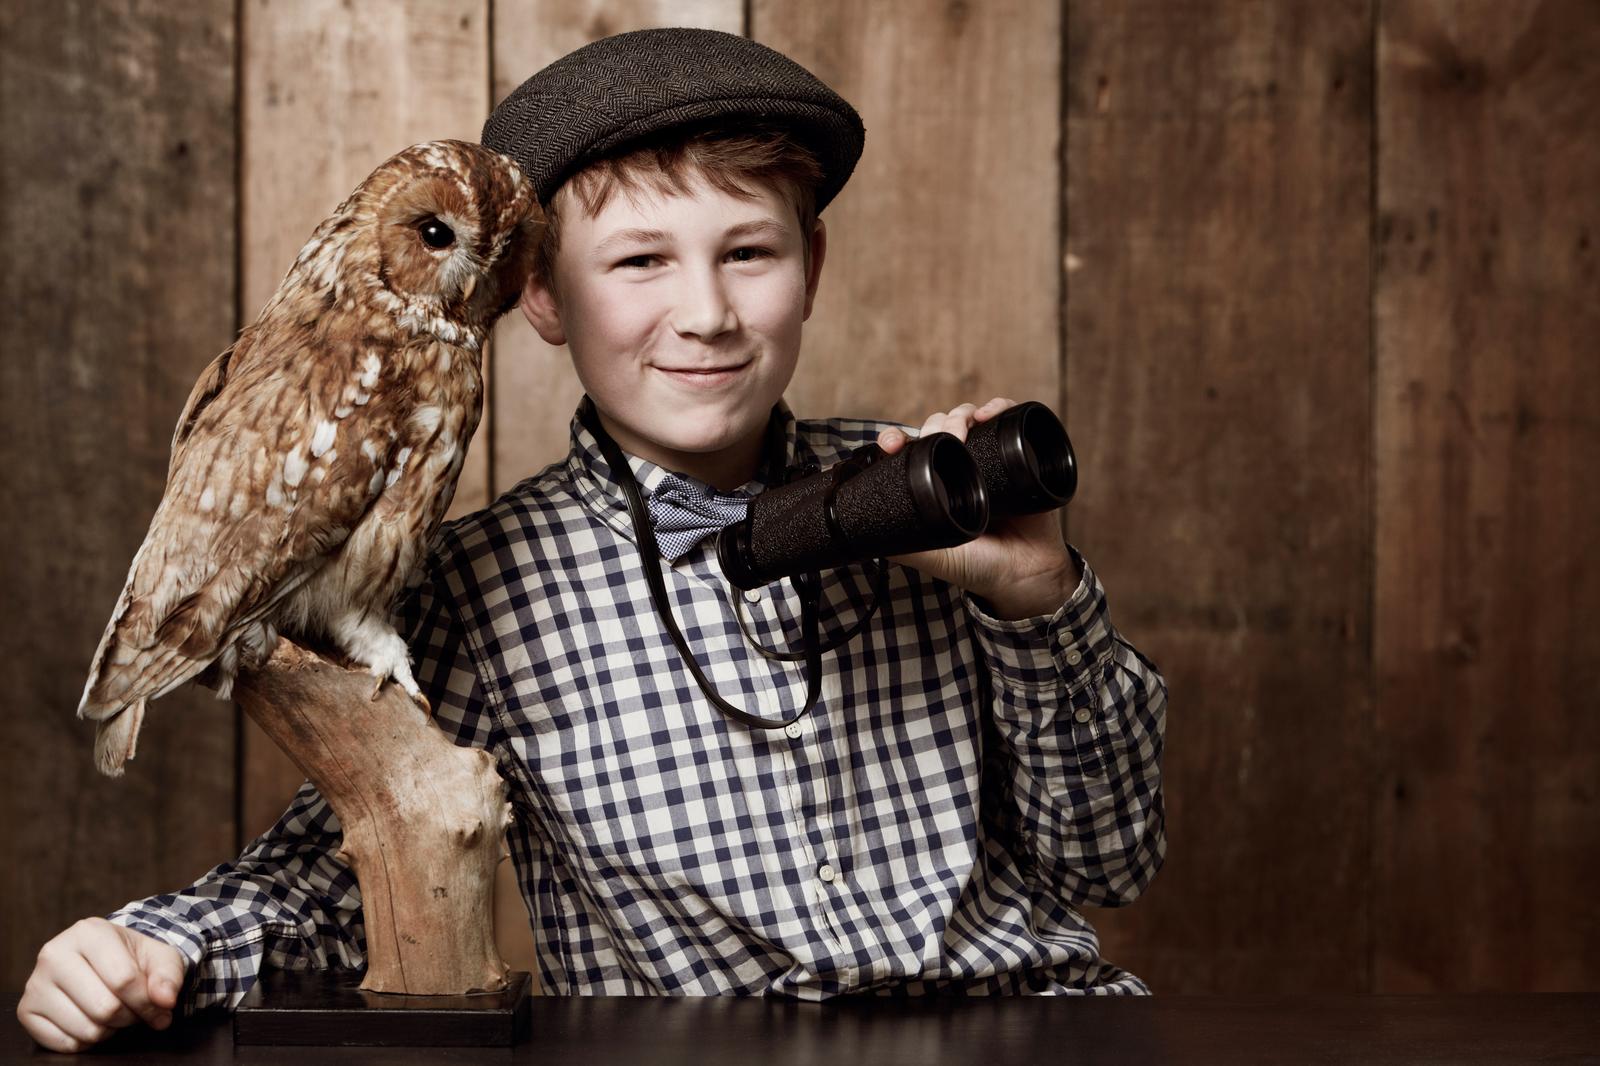 Ornithology is so much fun. Young boy in retro clothing wearing spectacles holding binoculars alongside an owl.